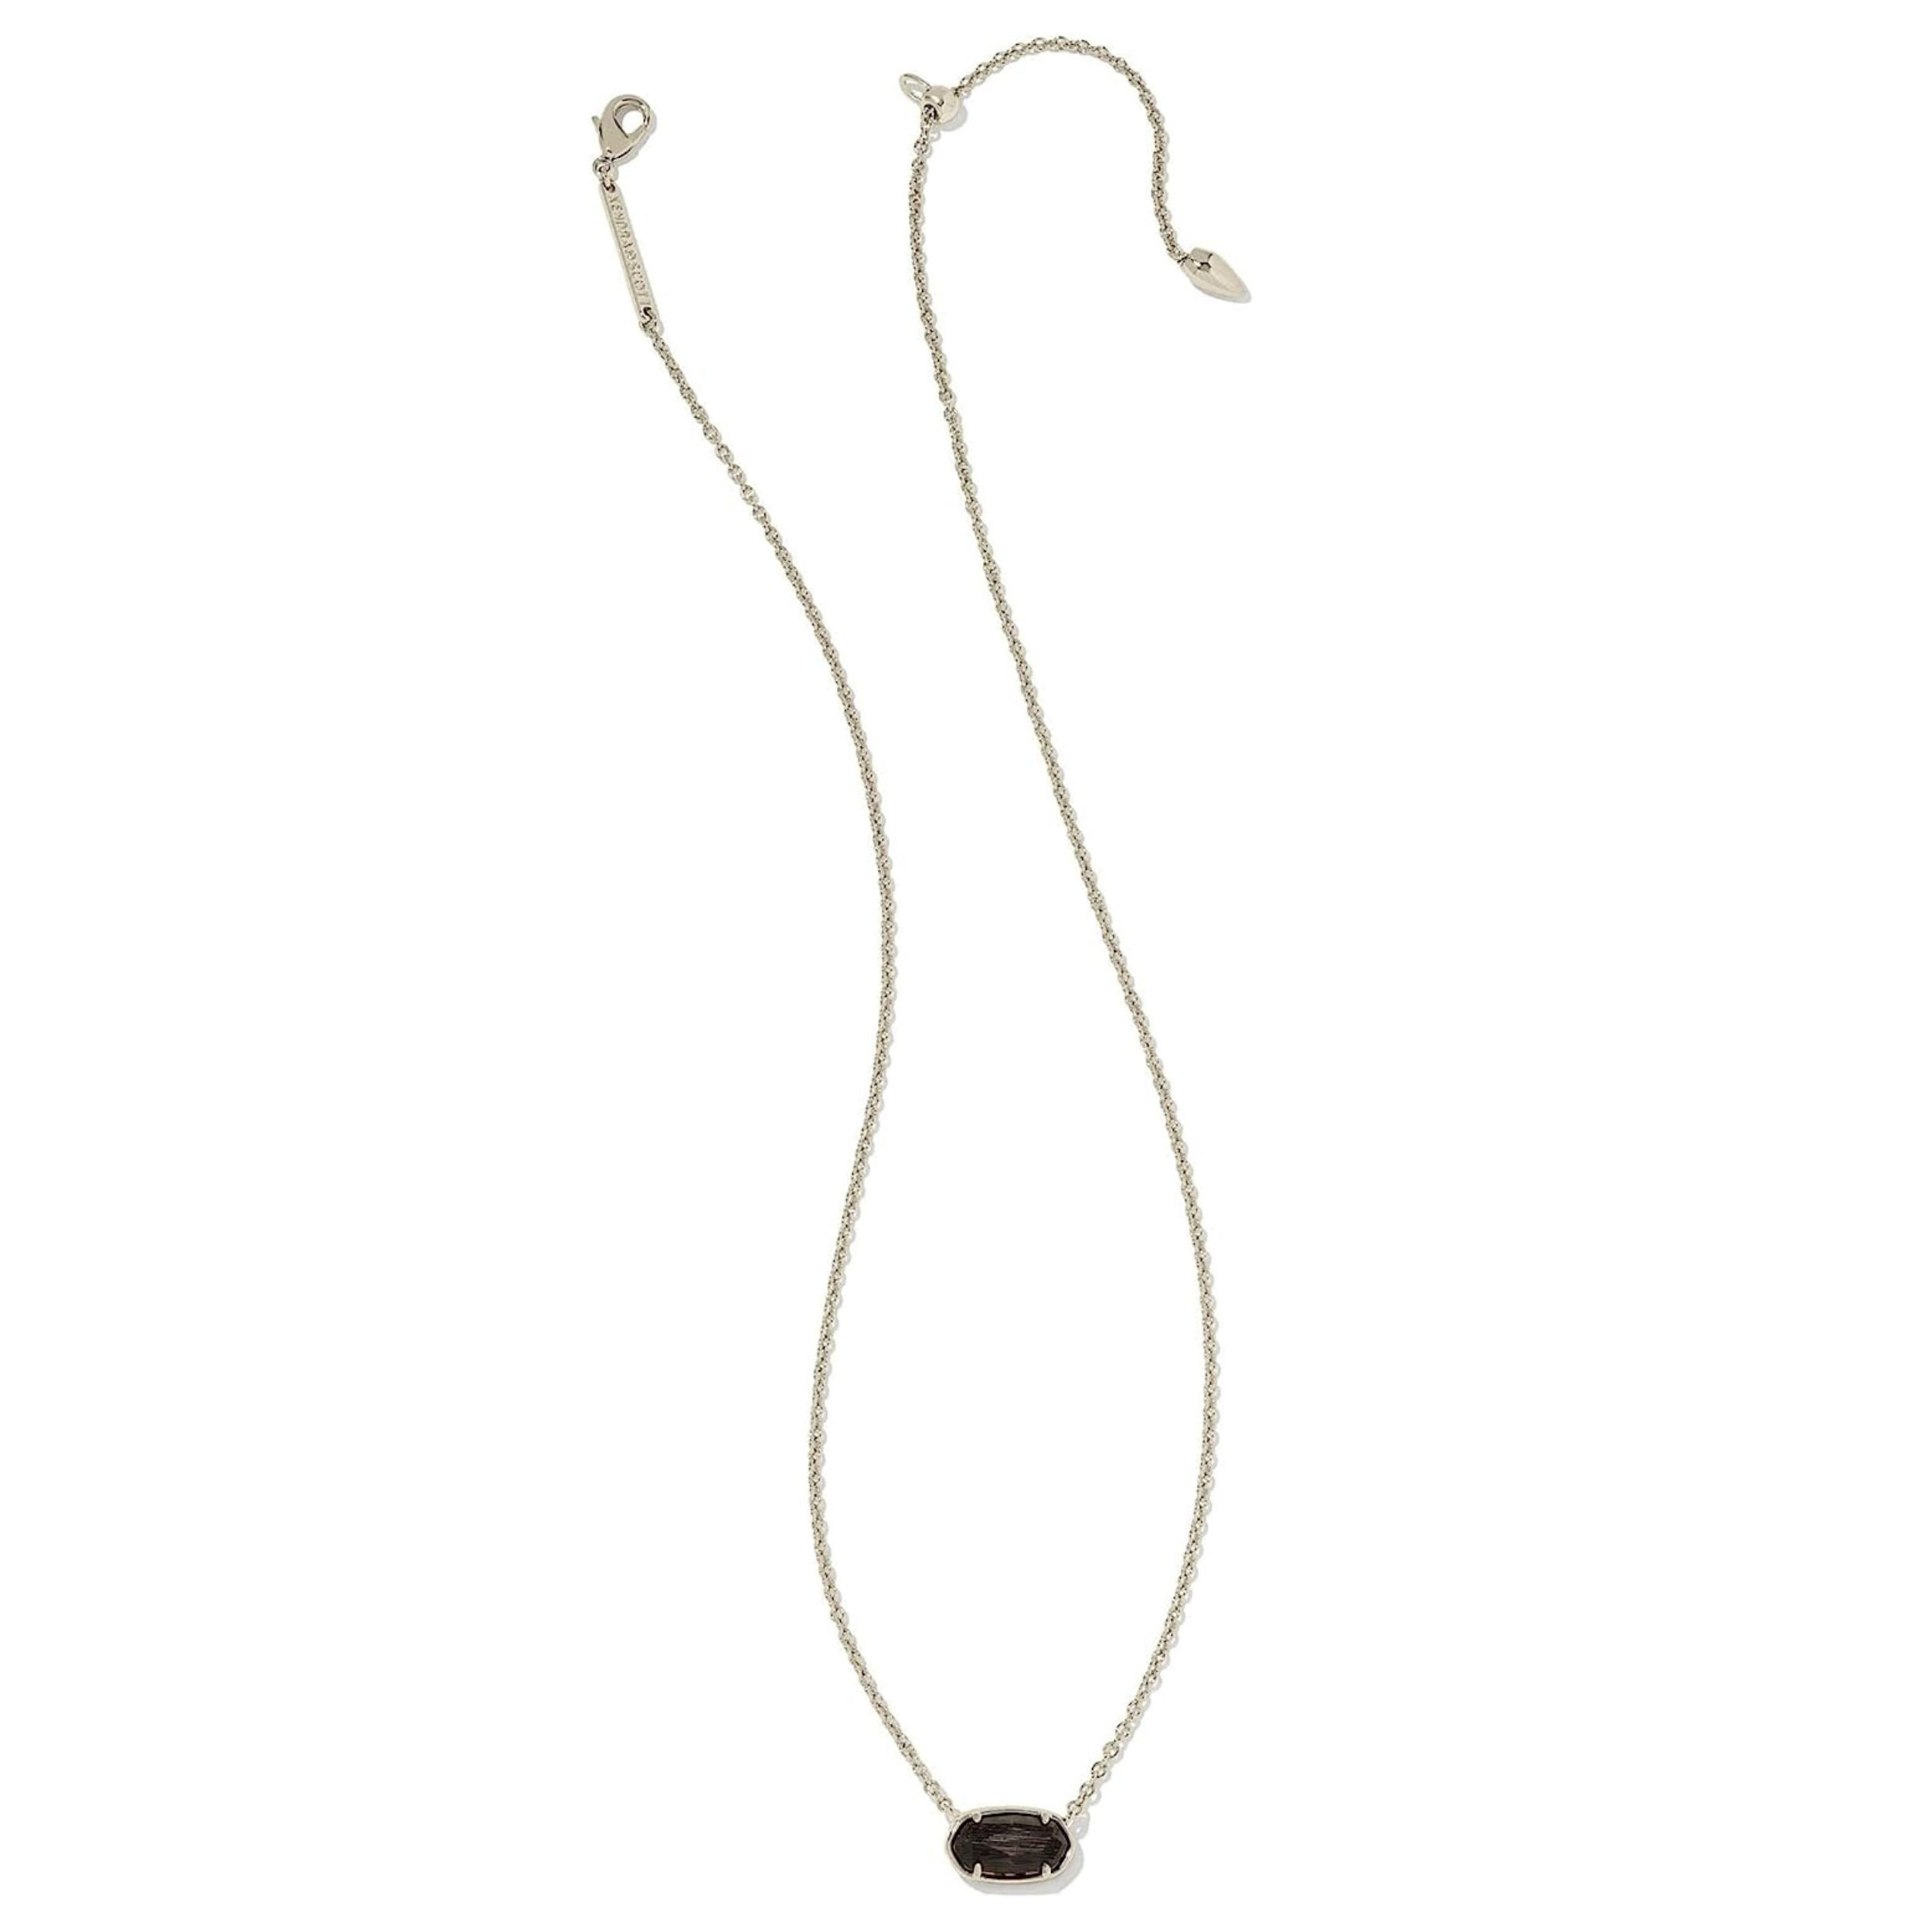 Kendra Scott | Grayson Silver Pendant Necklace in Black Cats Eye - Giddy Up Glamour Boutique